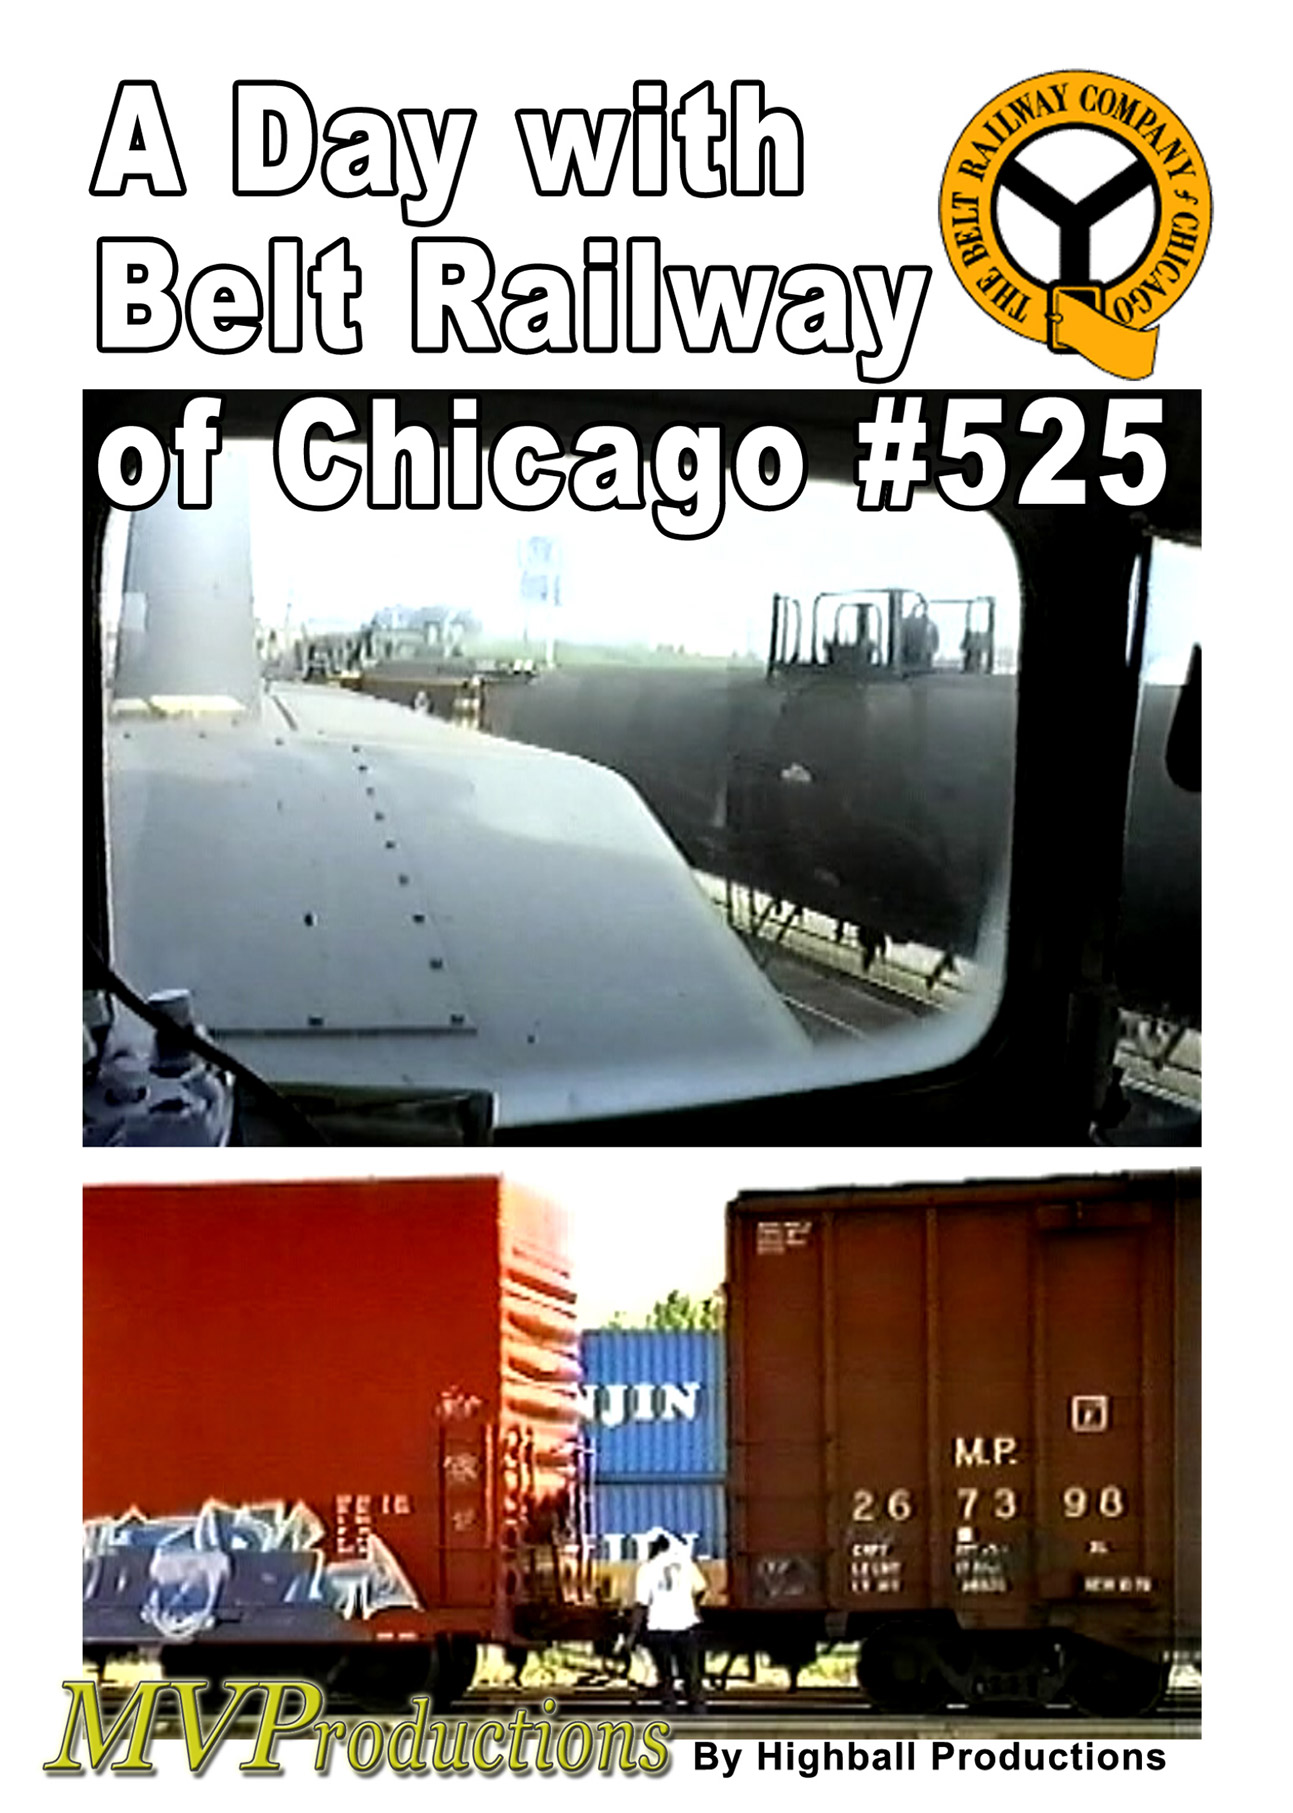 A Day with Belt Railway of Chicago #525 Midwest Video Productions MV525 601577879930